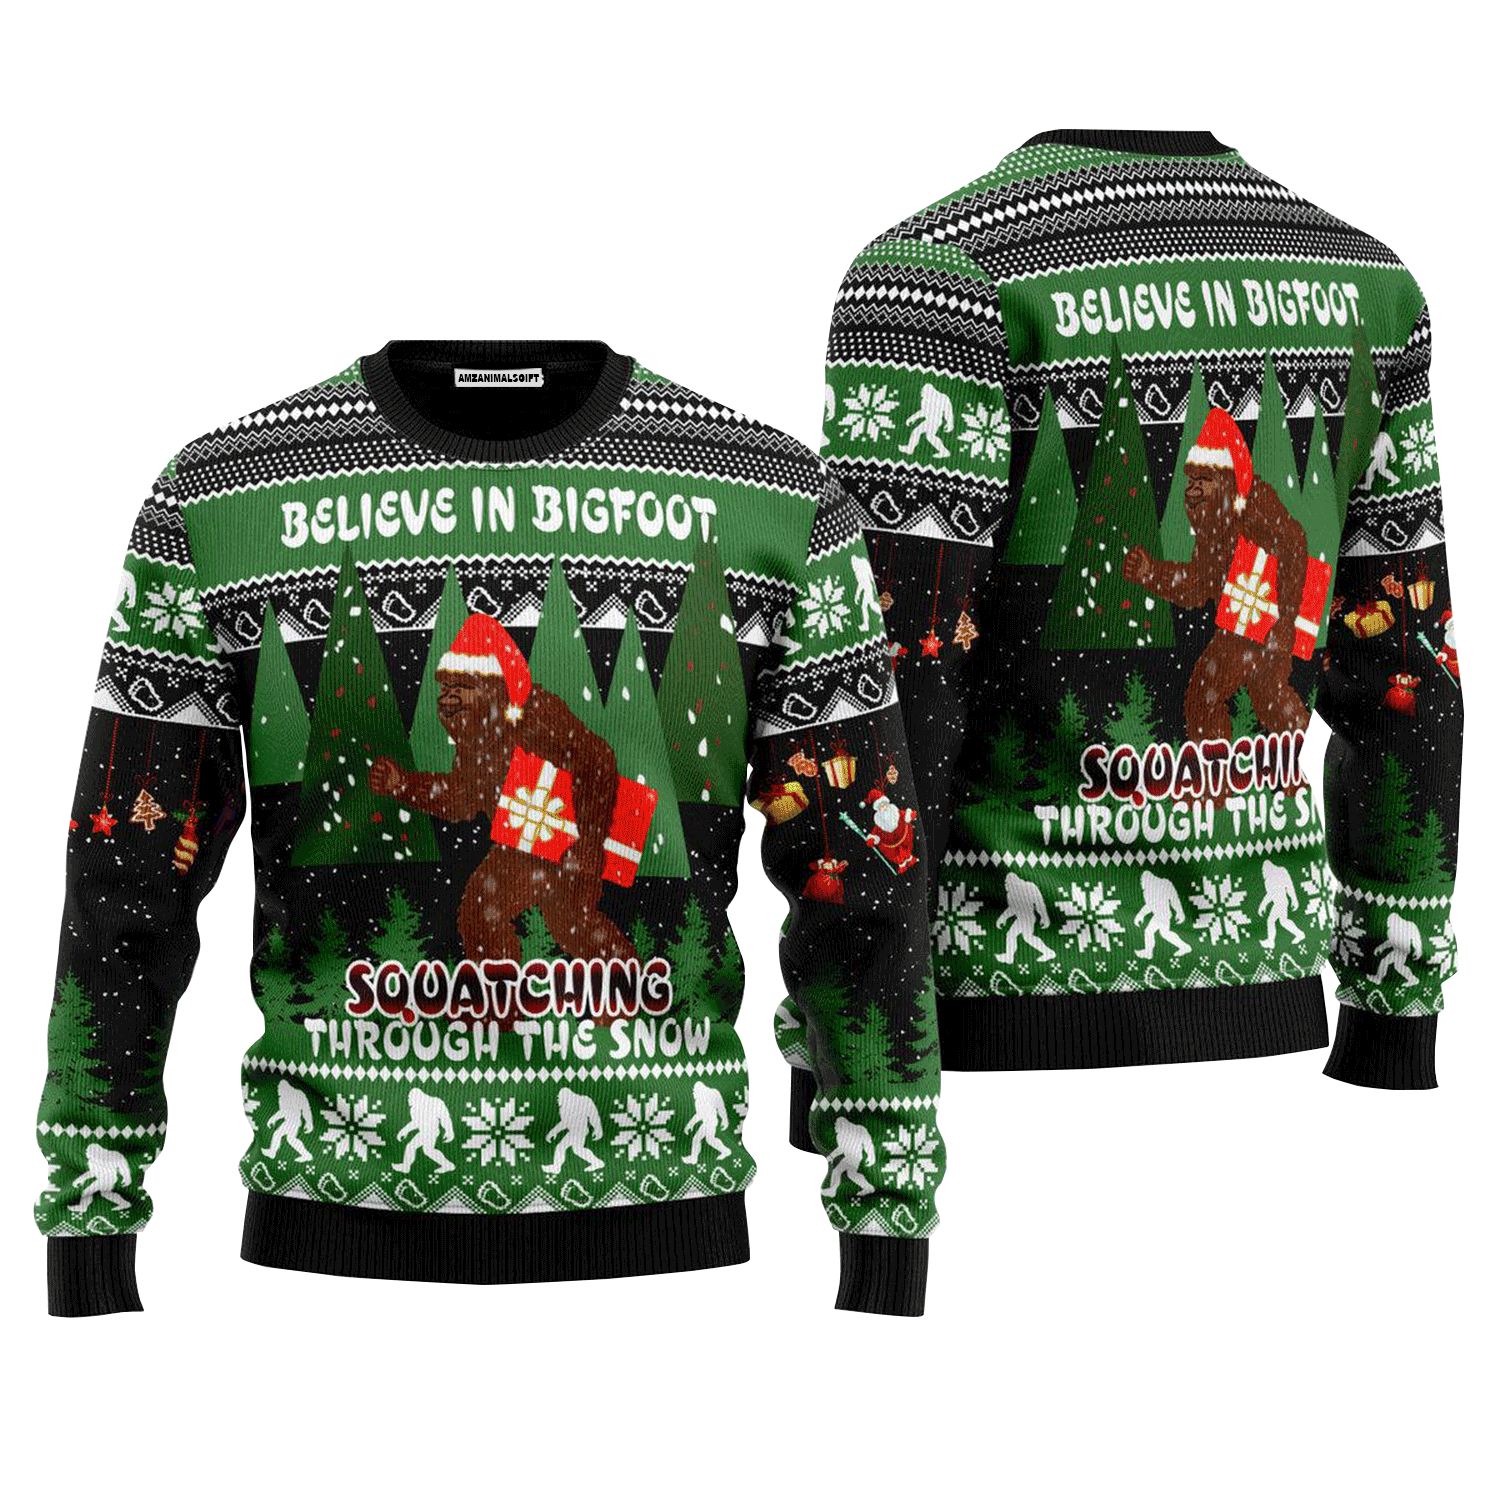 Bigfoot Snow Sweater Bevieve In Bigfoot, Ugly Christmas Sweater For Men & Women, Perfect Outfit For Christmas New Year Autumn Winter